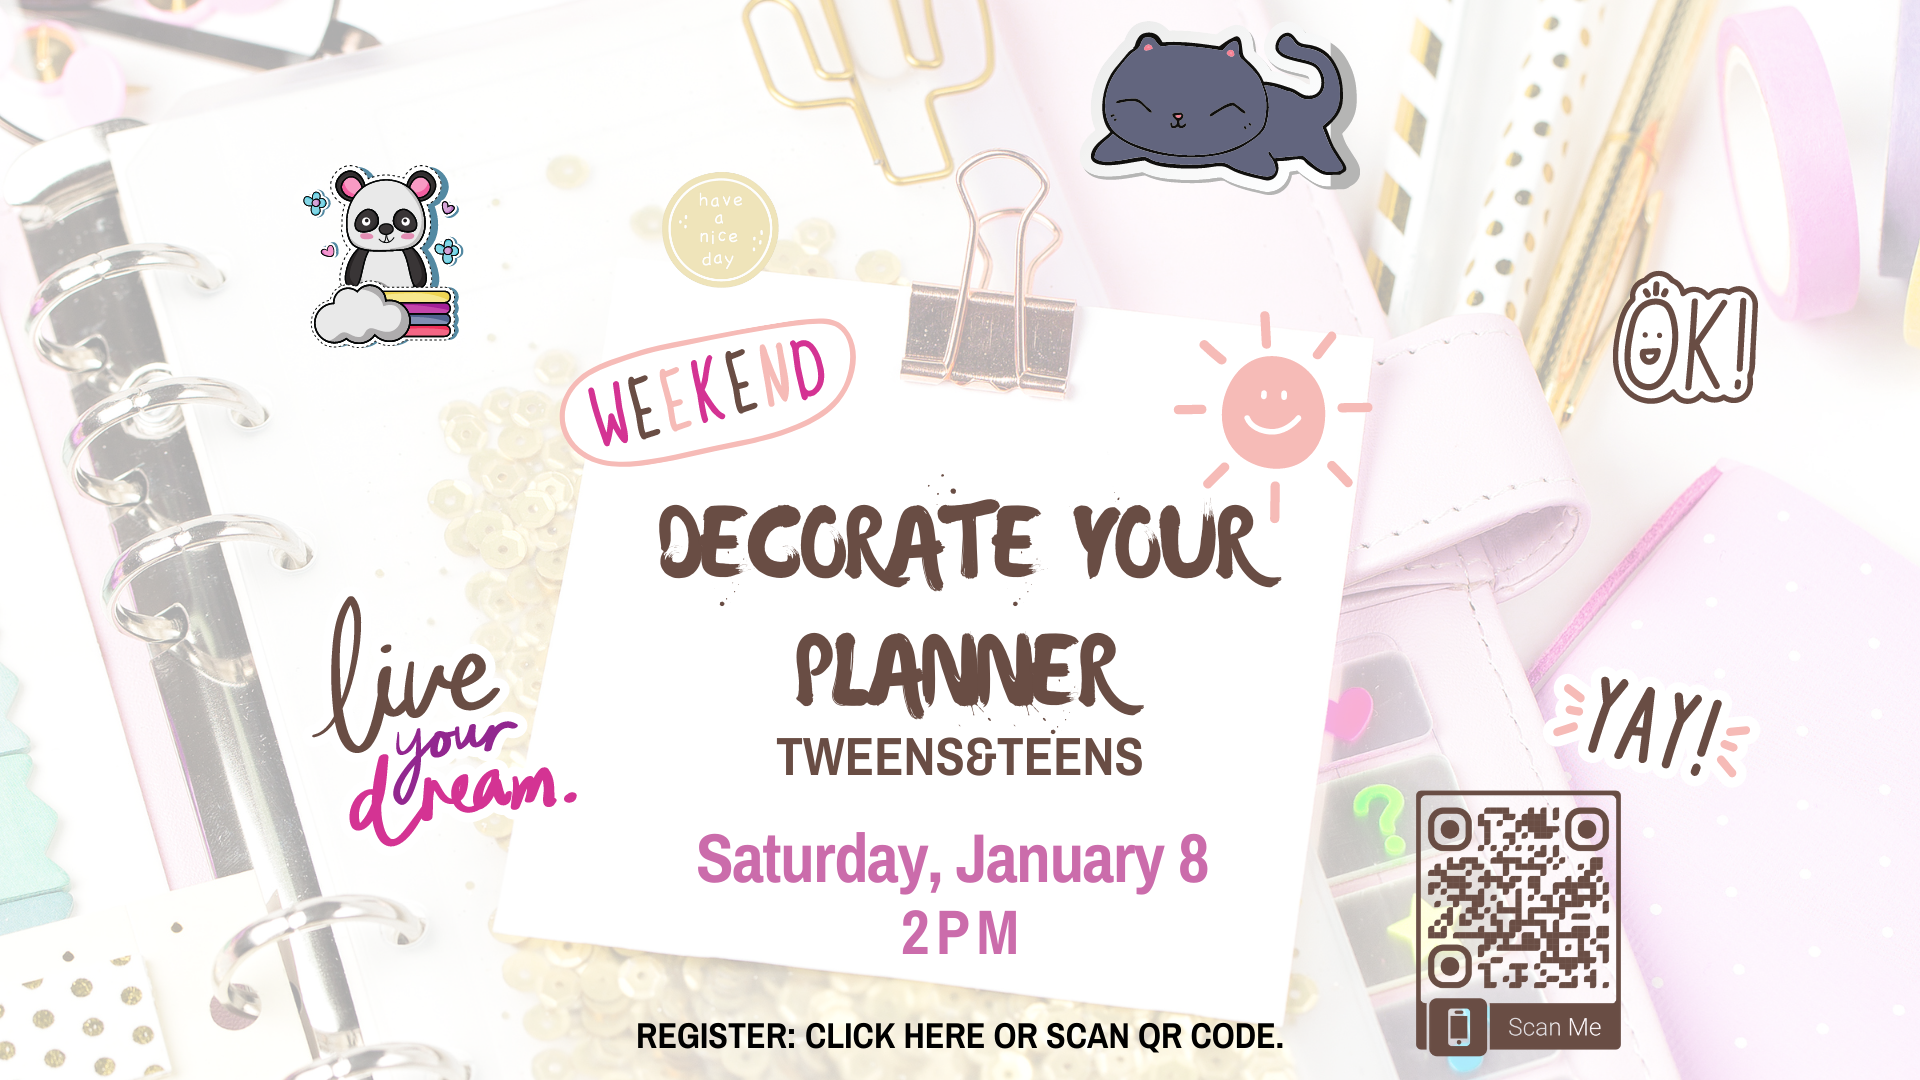 FB Decorate Your Planner 1.8.22.png